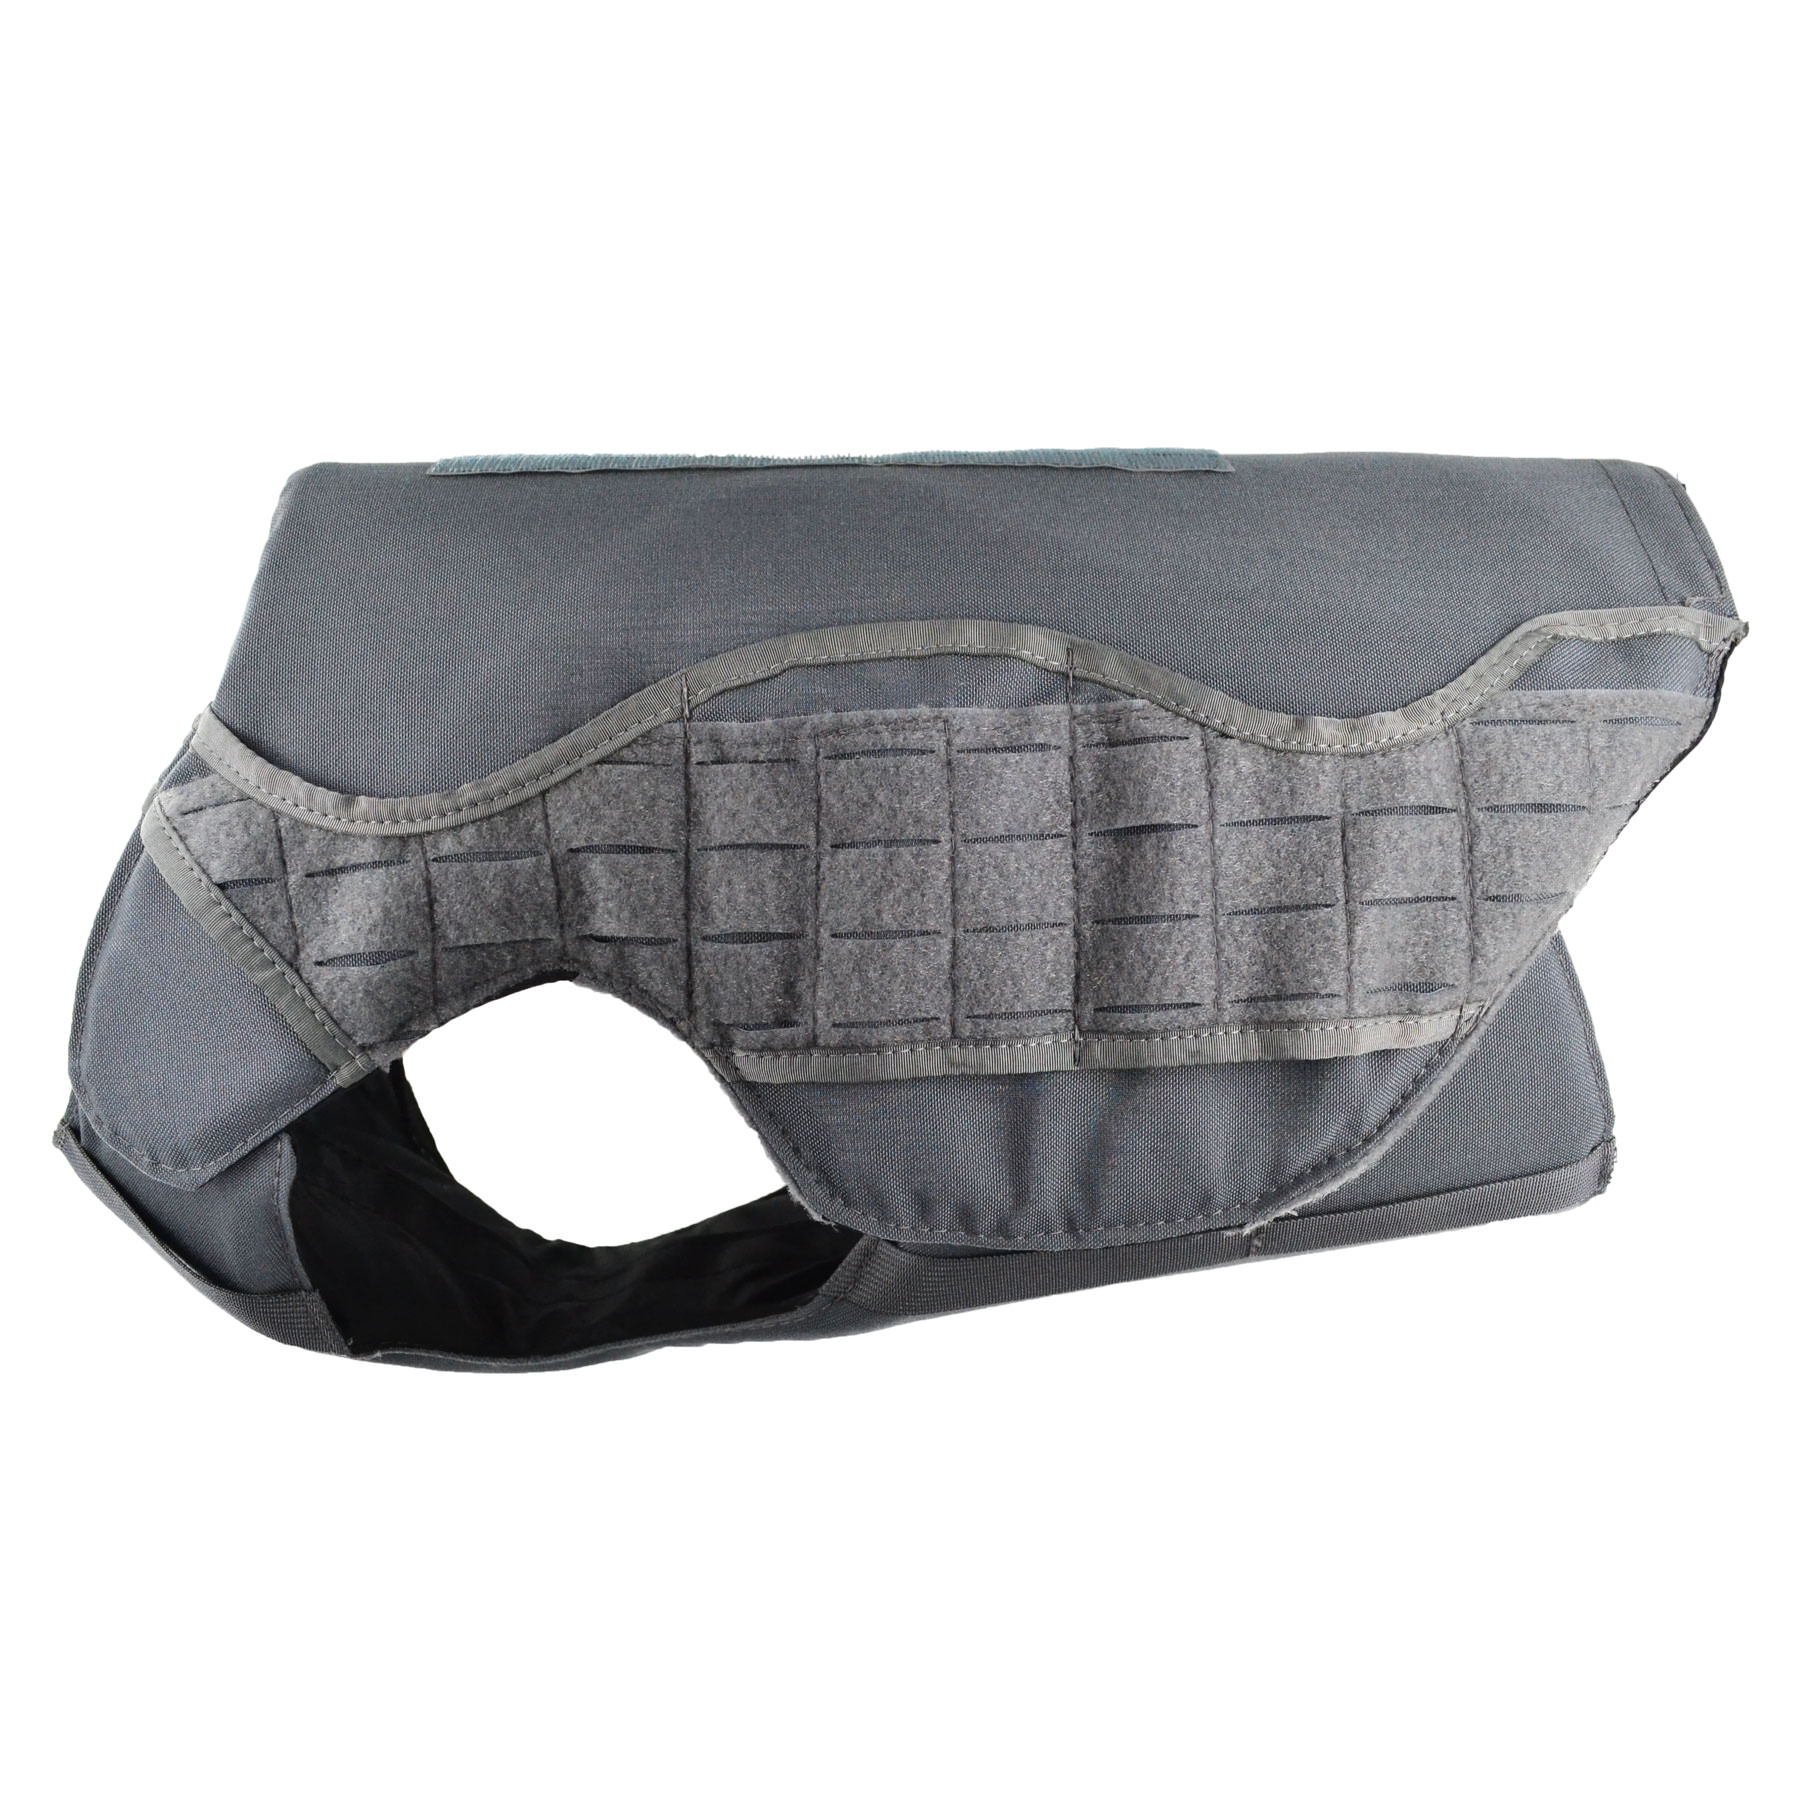 Dog carrier, Nomad, grey and black, size S 40 x 61 x 41 cm FL-51377